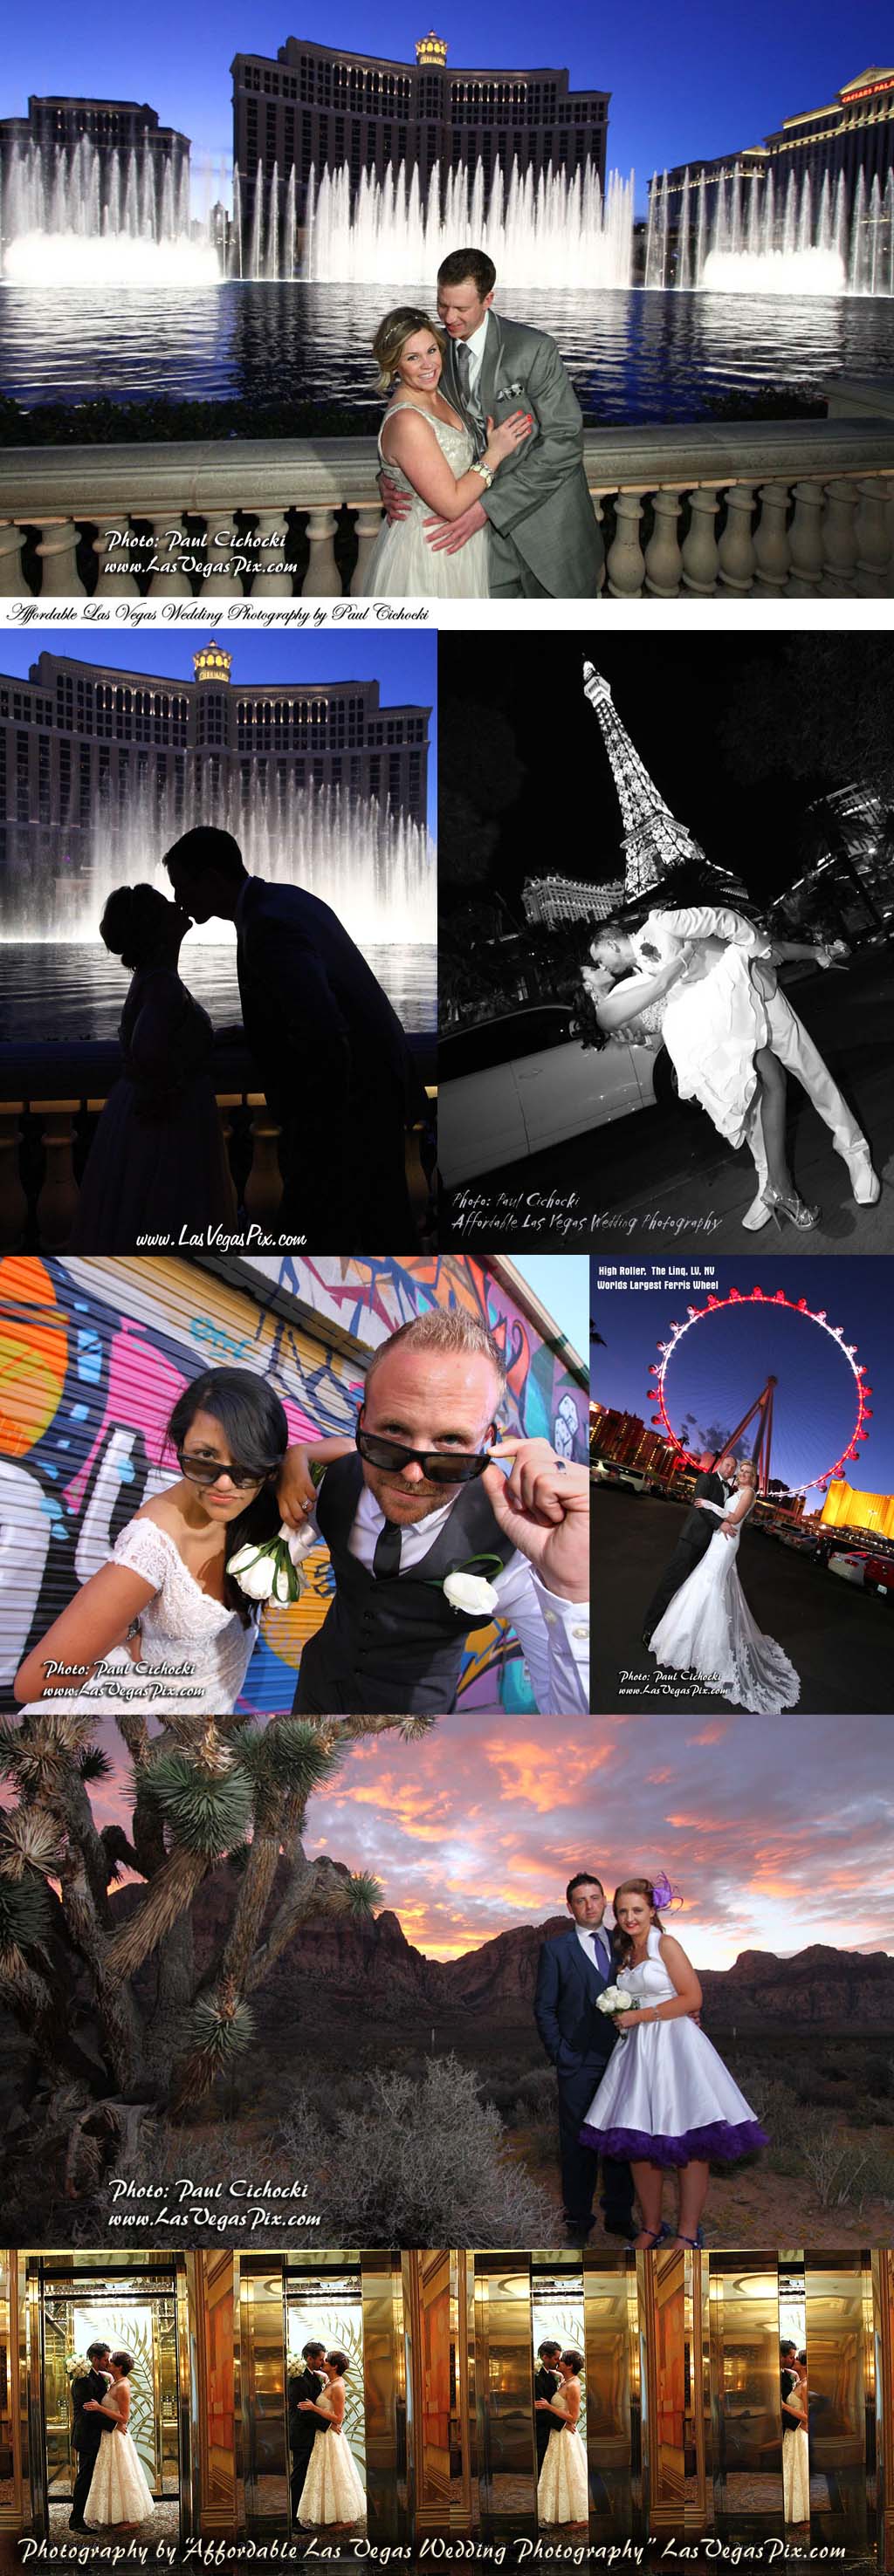 Affordable Las Vegas Wedding Photography Offers Budget Prices On